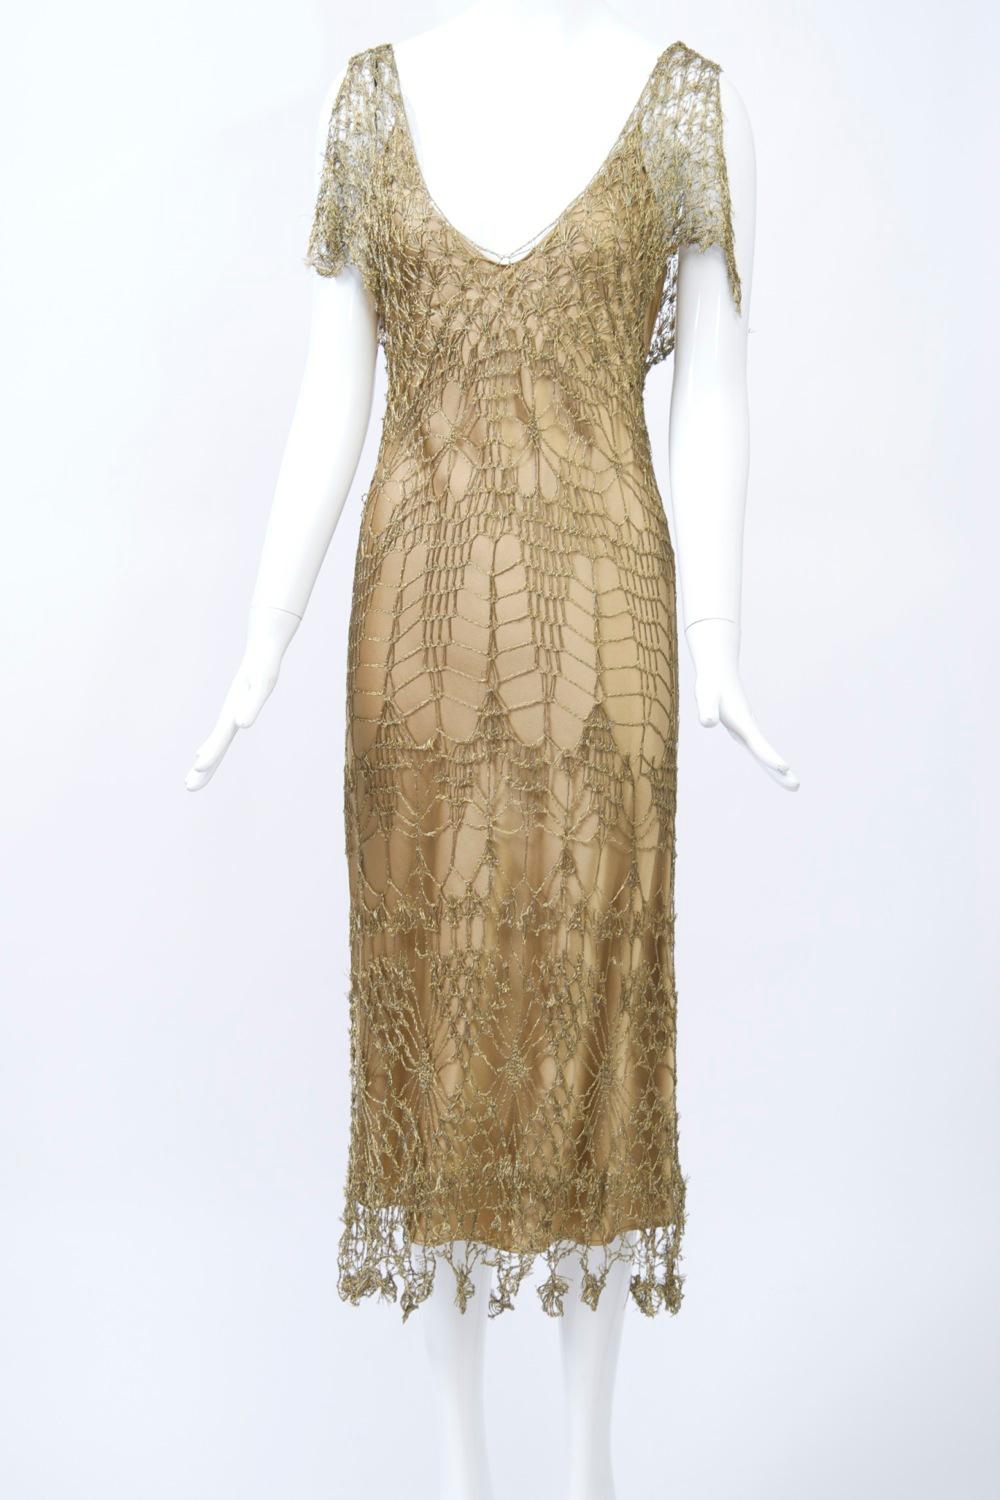 Donna Karan metallic gold crochet lace dress with a complementary silk charmeuse slip dress underneath. The crochet dress skims the body and features a deep V neckline front and back, slit cap sleeves, and handkerchief points at the hem. Both pieces